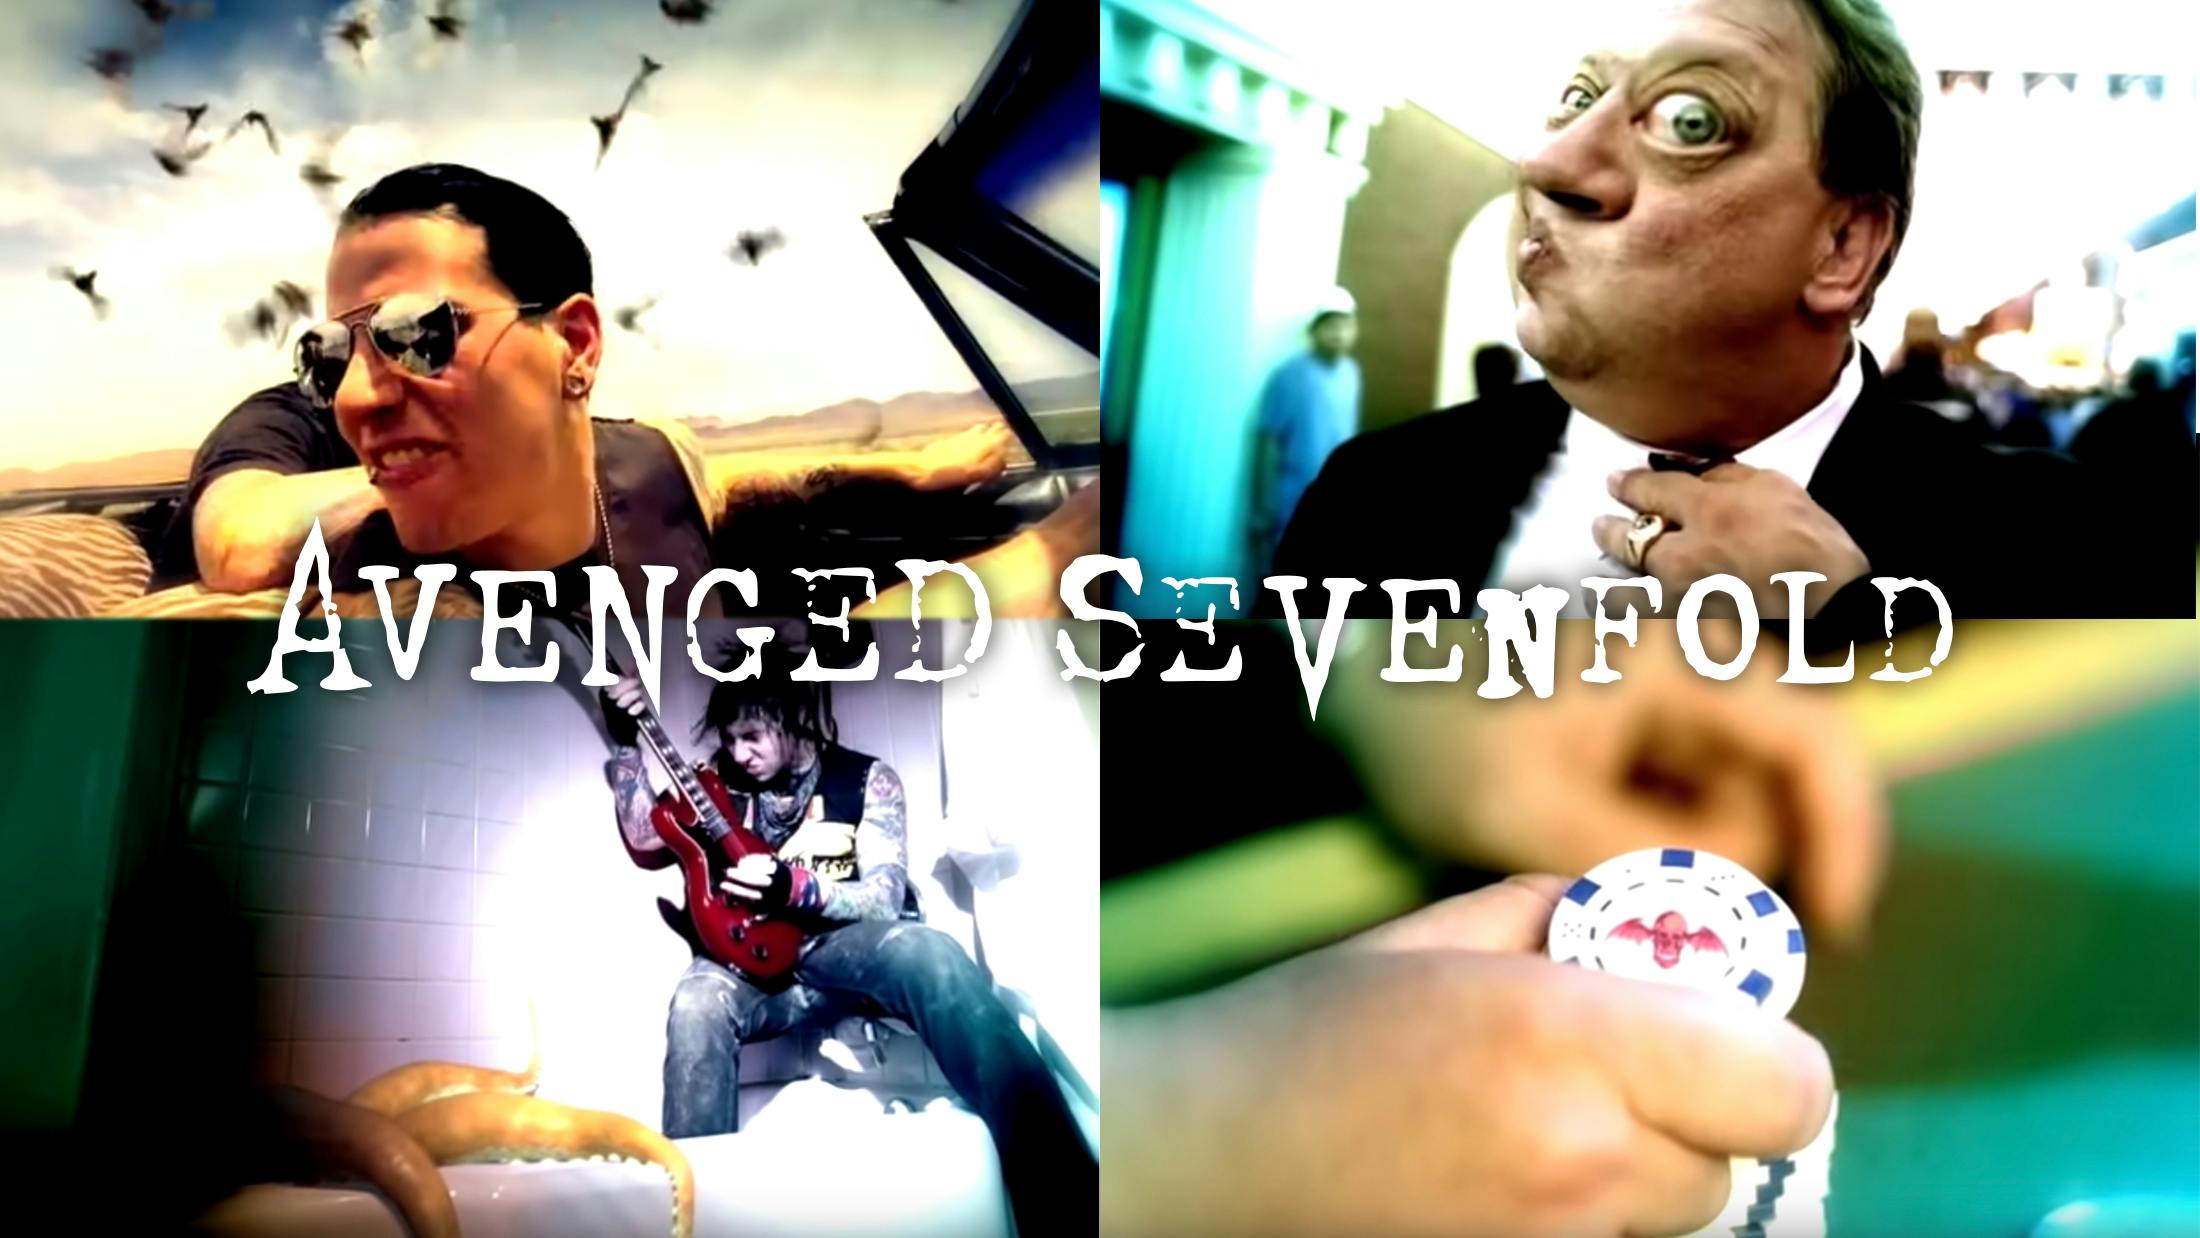 A deep dive into Avenged Sevenfold’s Bat Country video